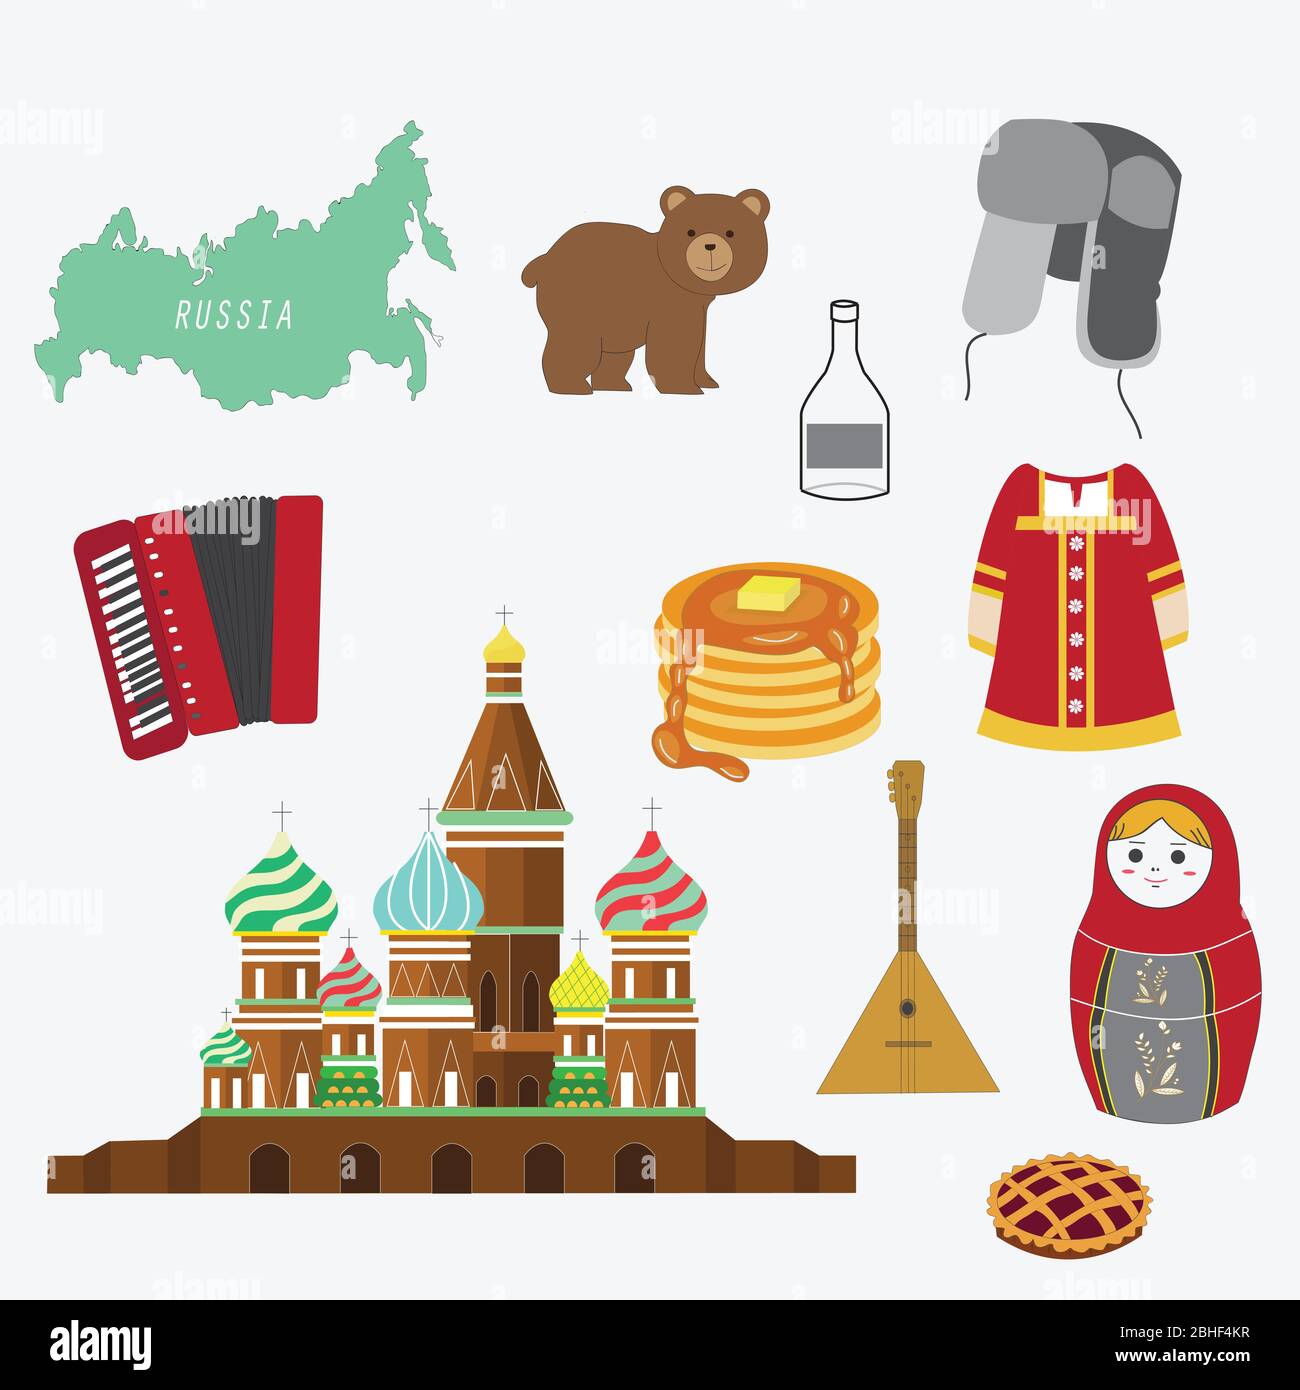 Russia country flag russian - Culture, Religion & Festivals Icons